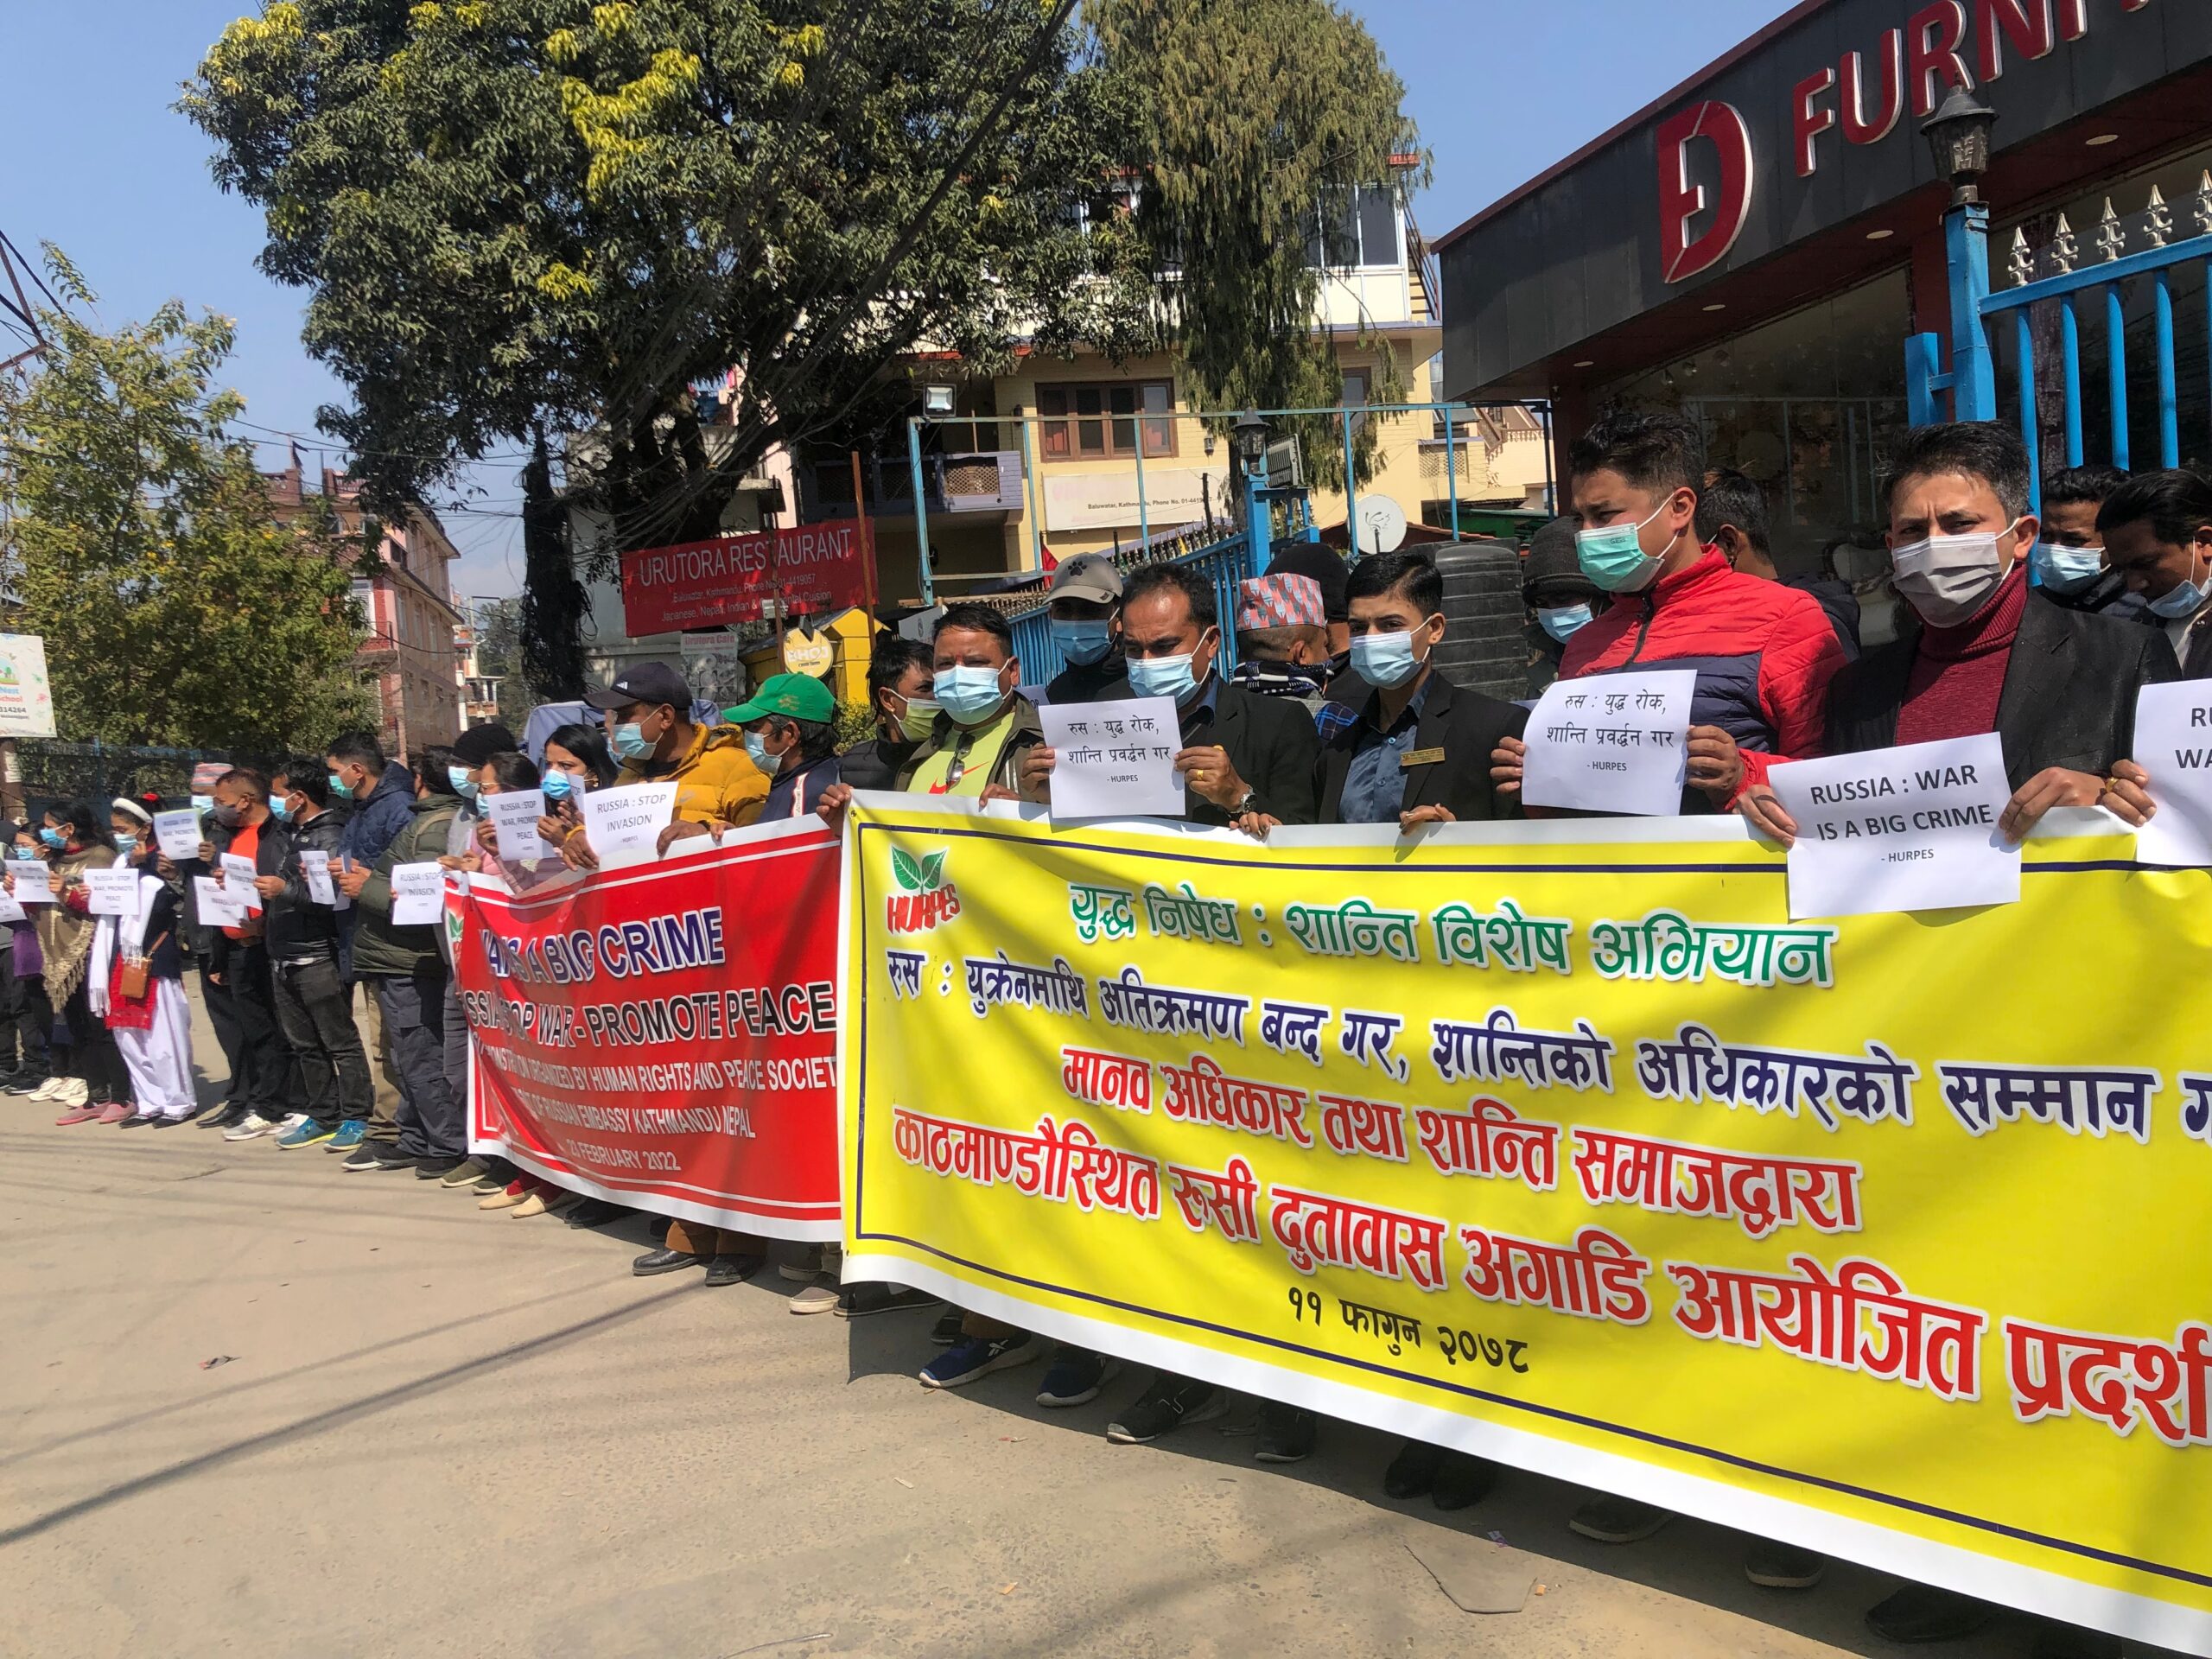 HURPES protests in Kathmandu, urges Russia to stop war